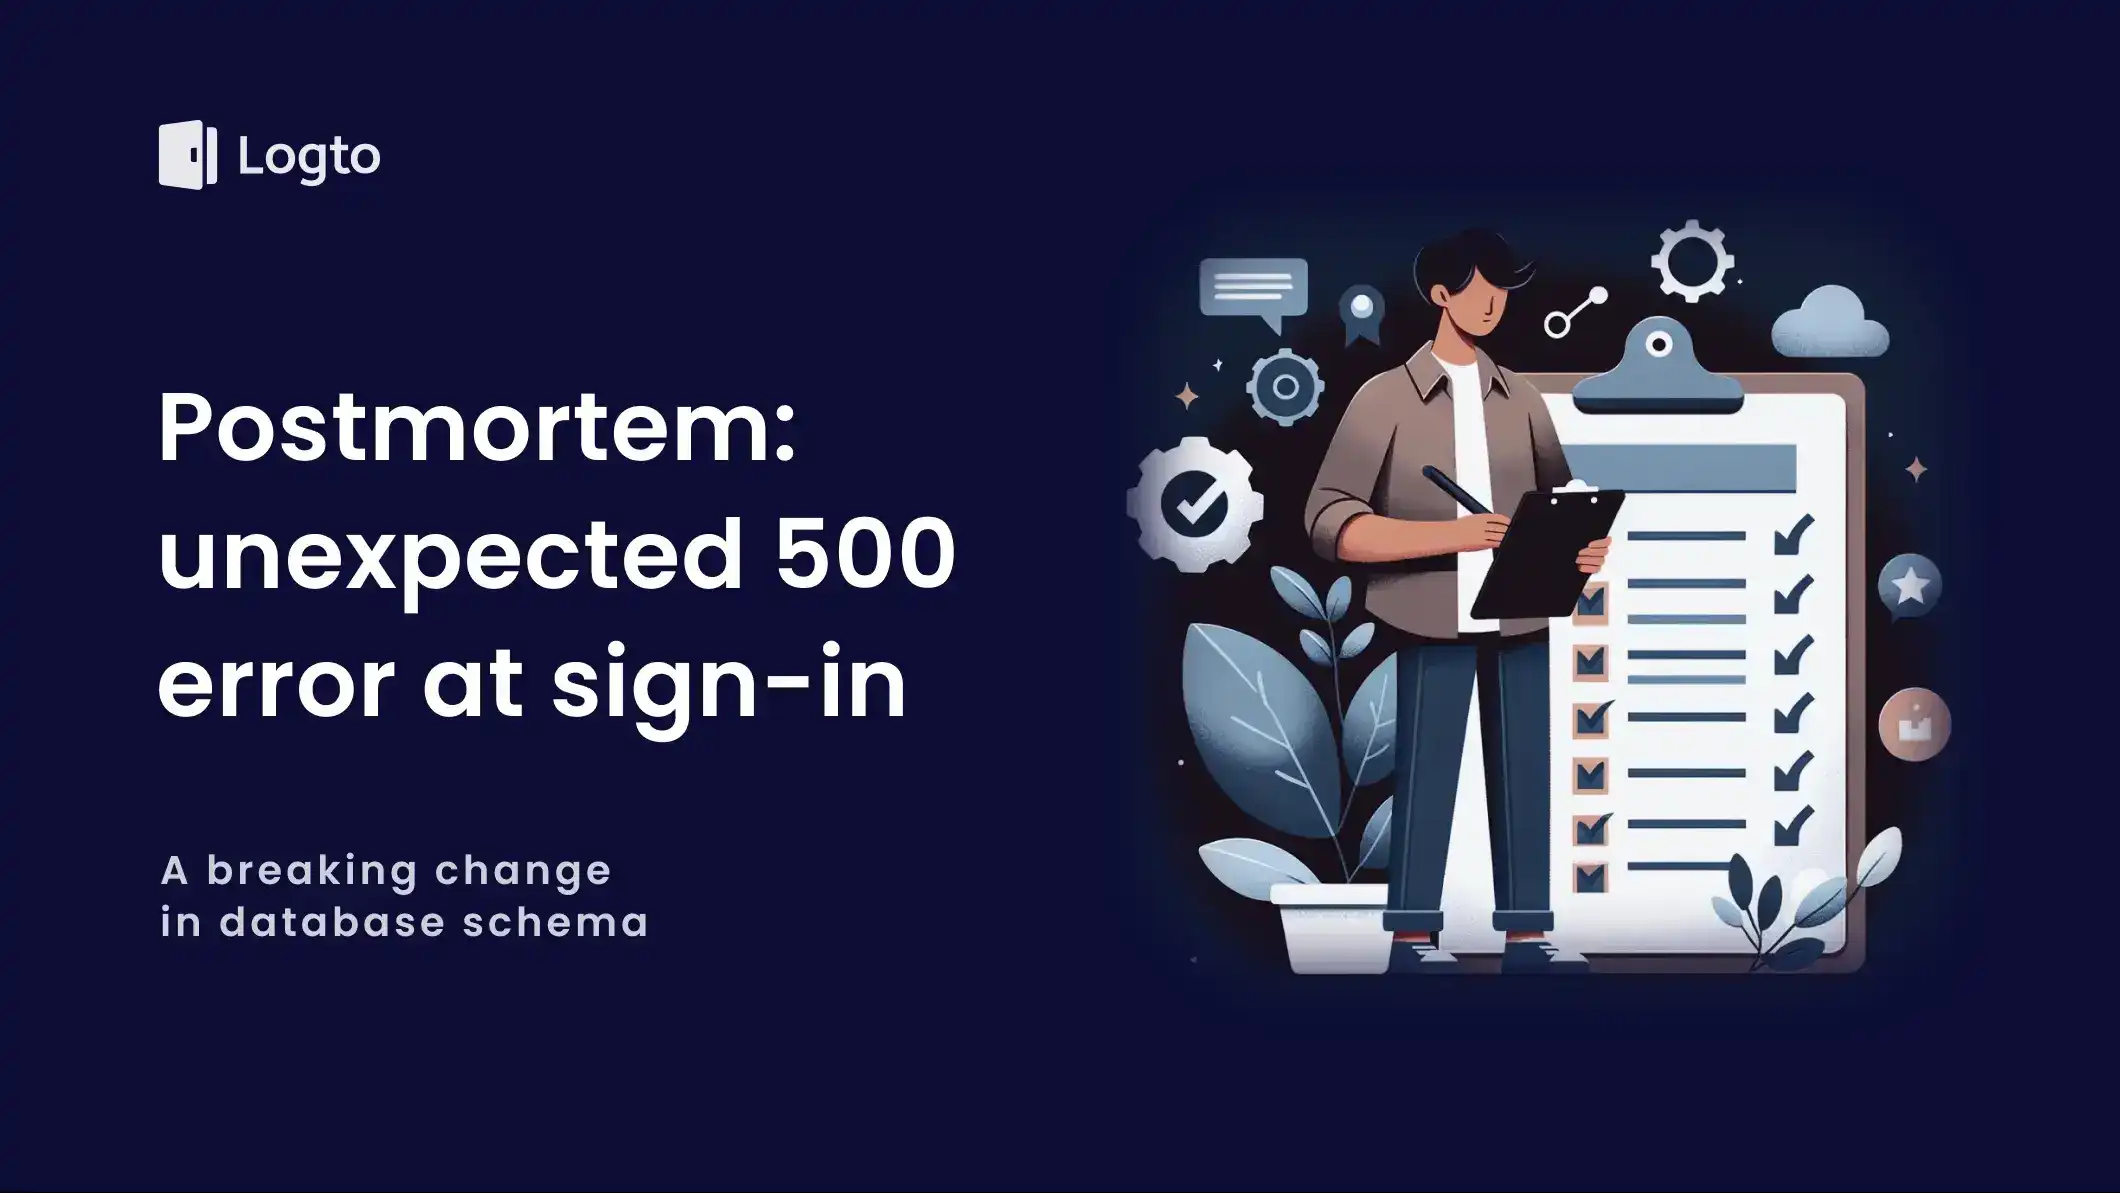 Postmortem: unexpected 500 error occurred during user sign-in